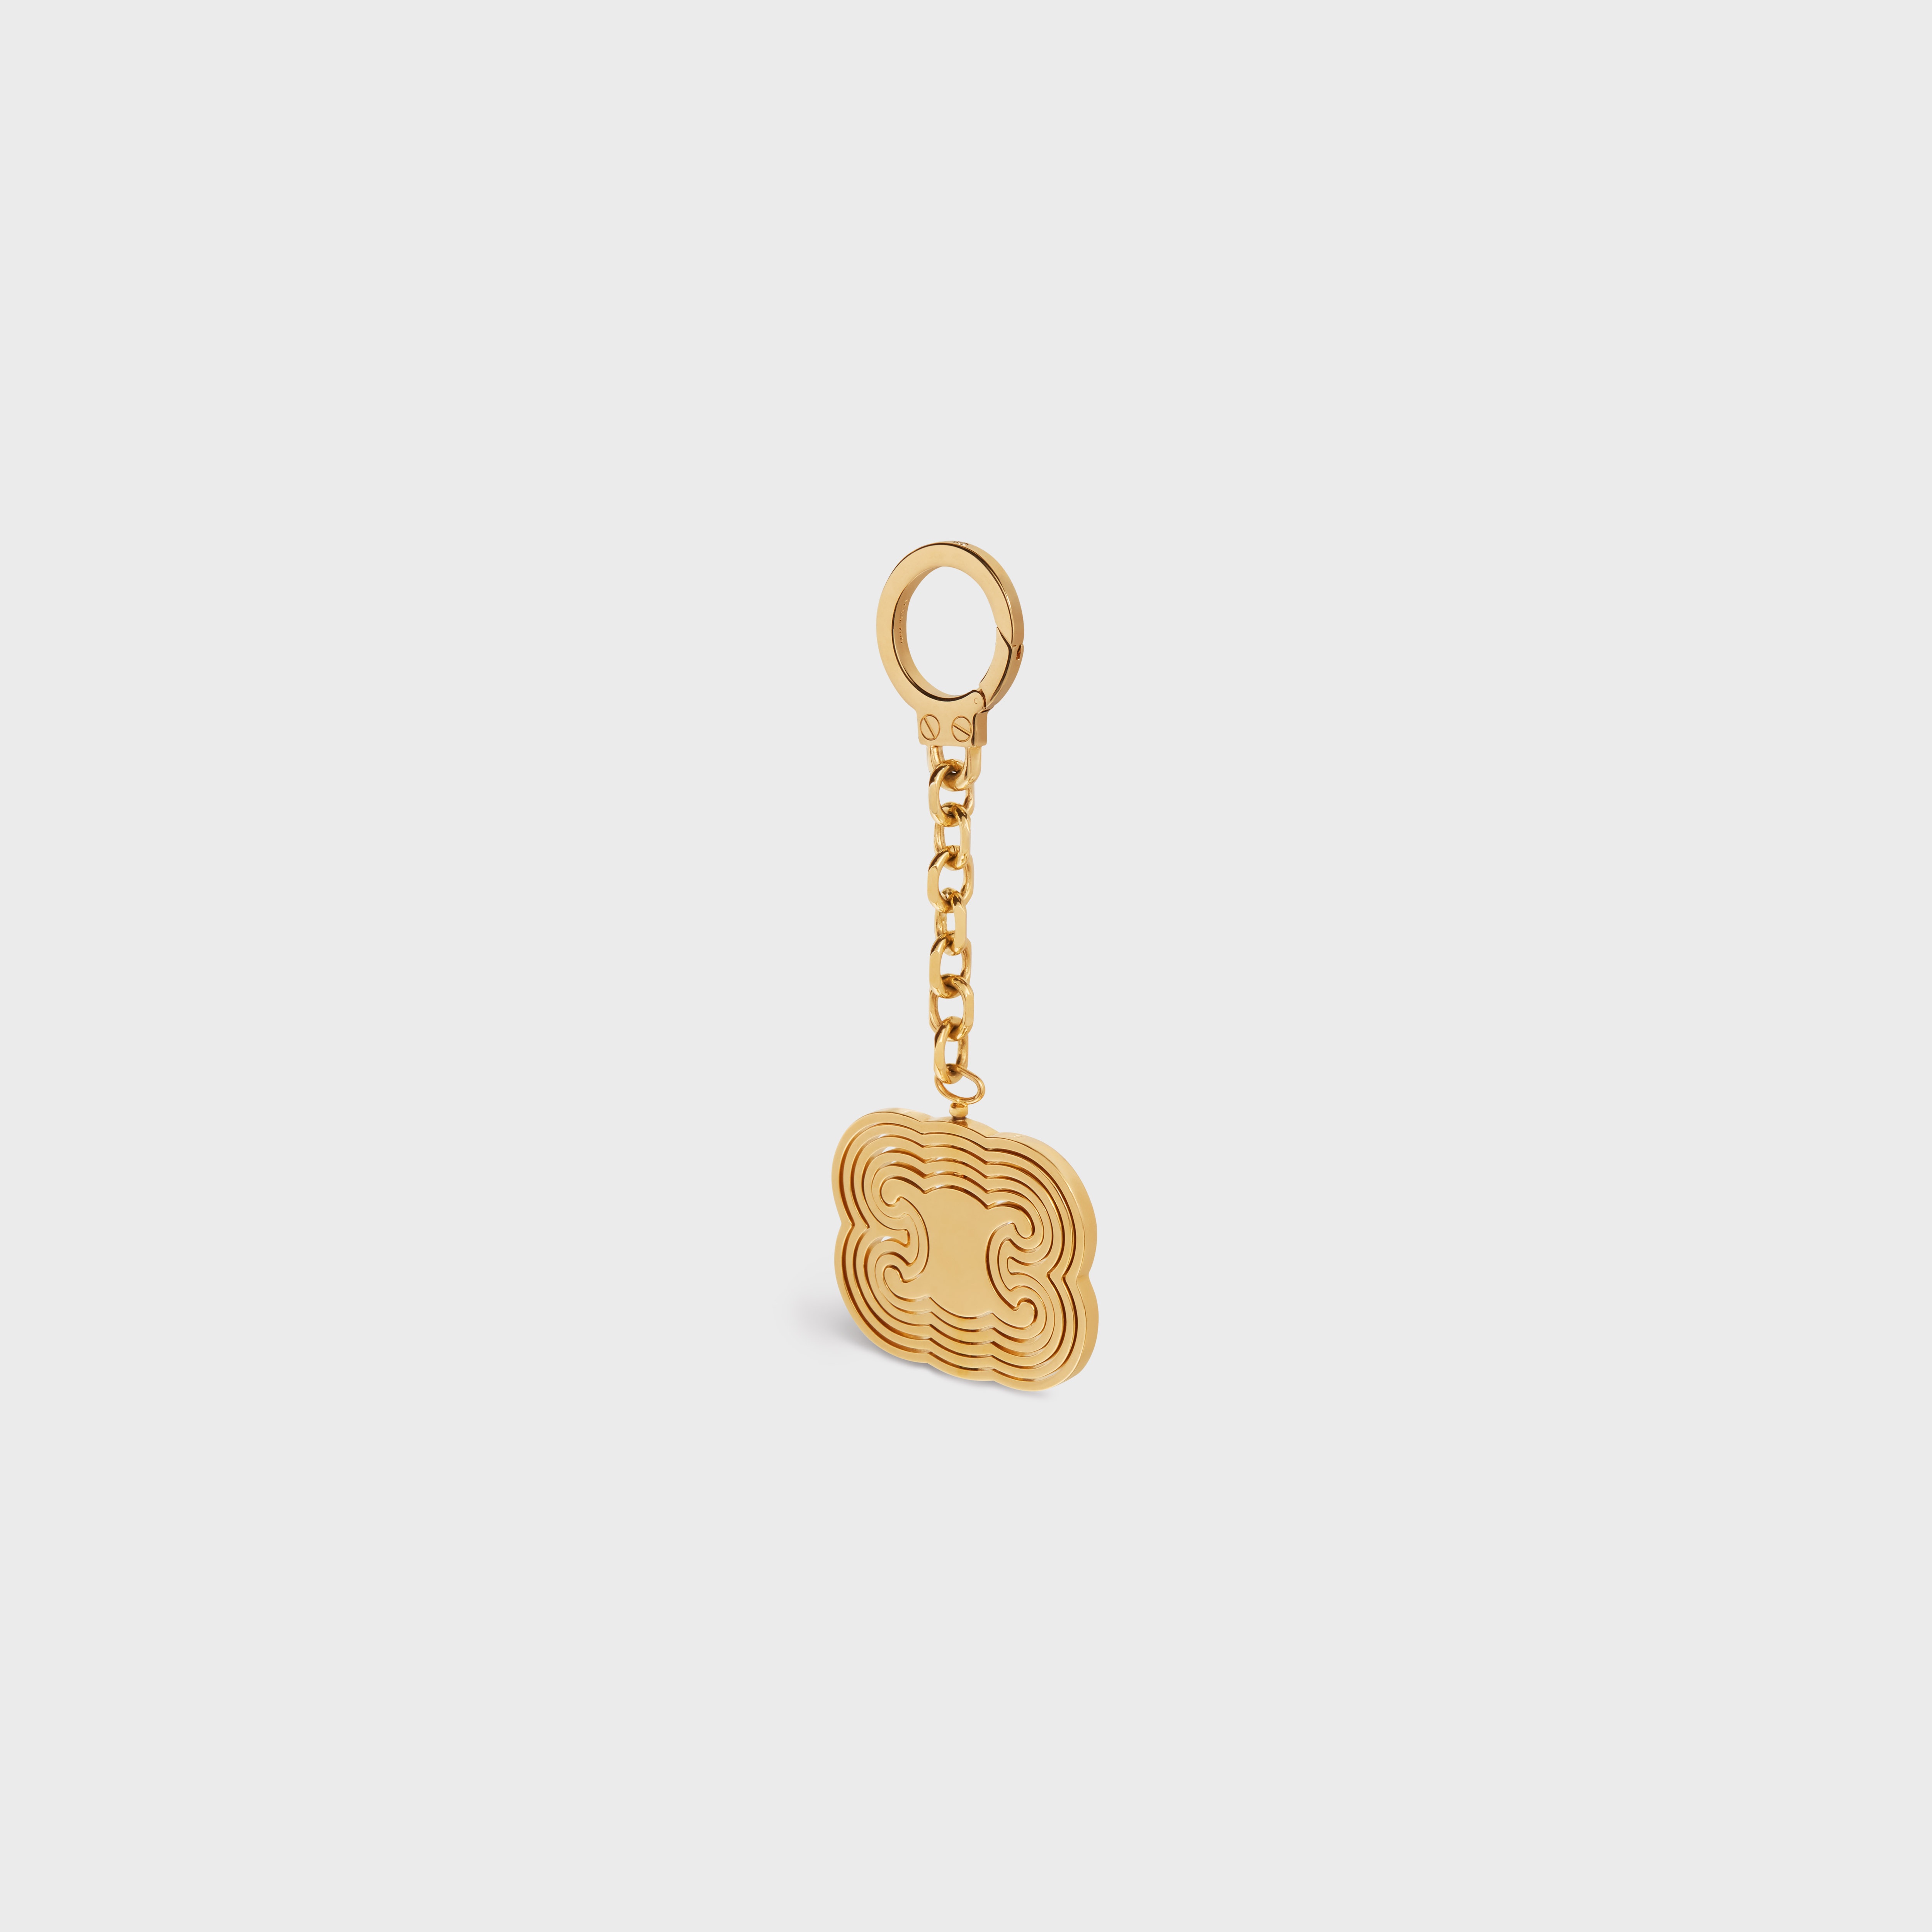 TRIOMPHE HELIX CHARM in Brass - 4